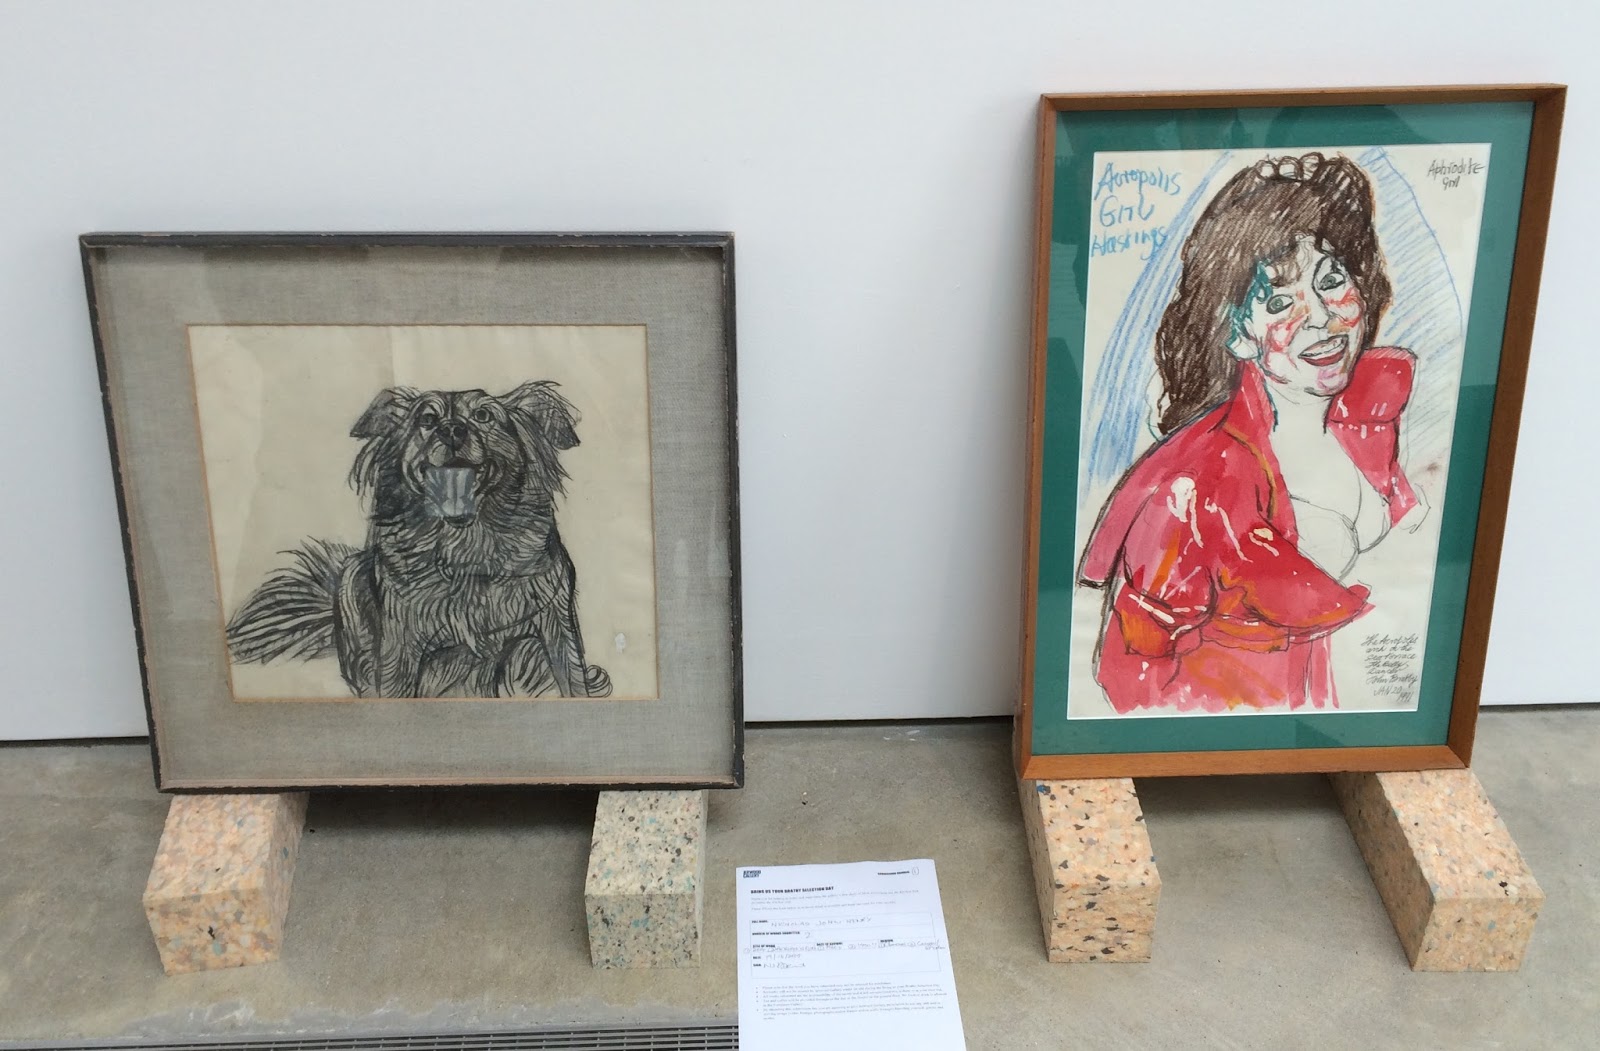 Bratby Selection Day at the Jerwood – our pictures take part!